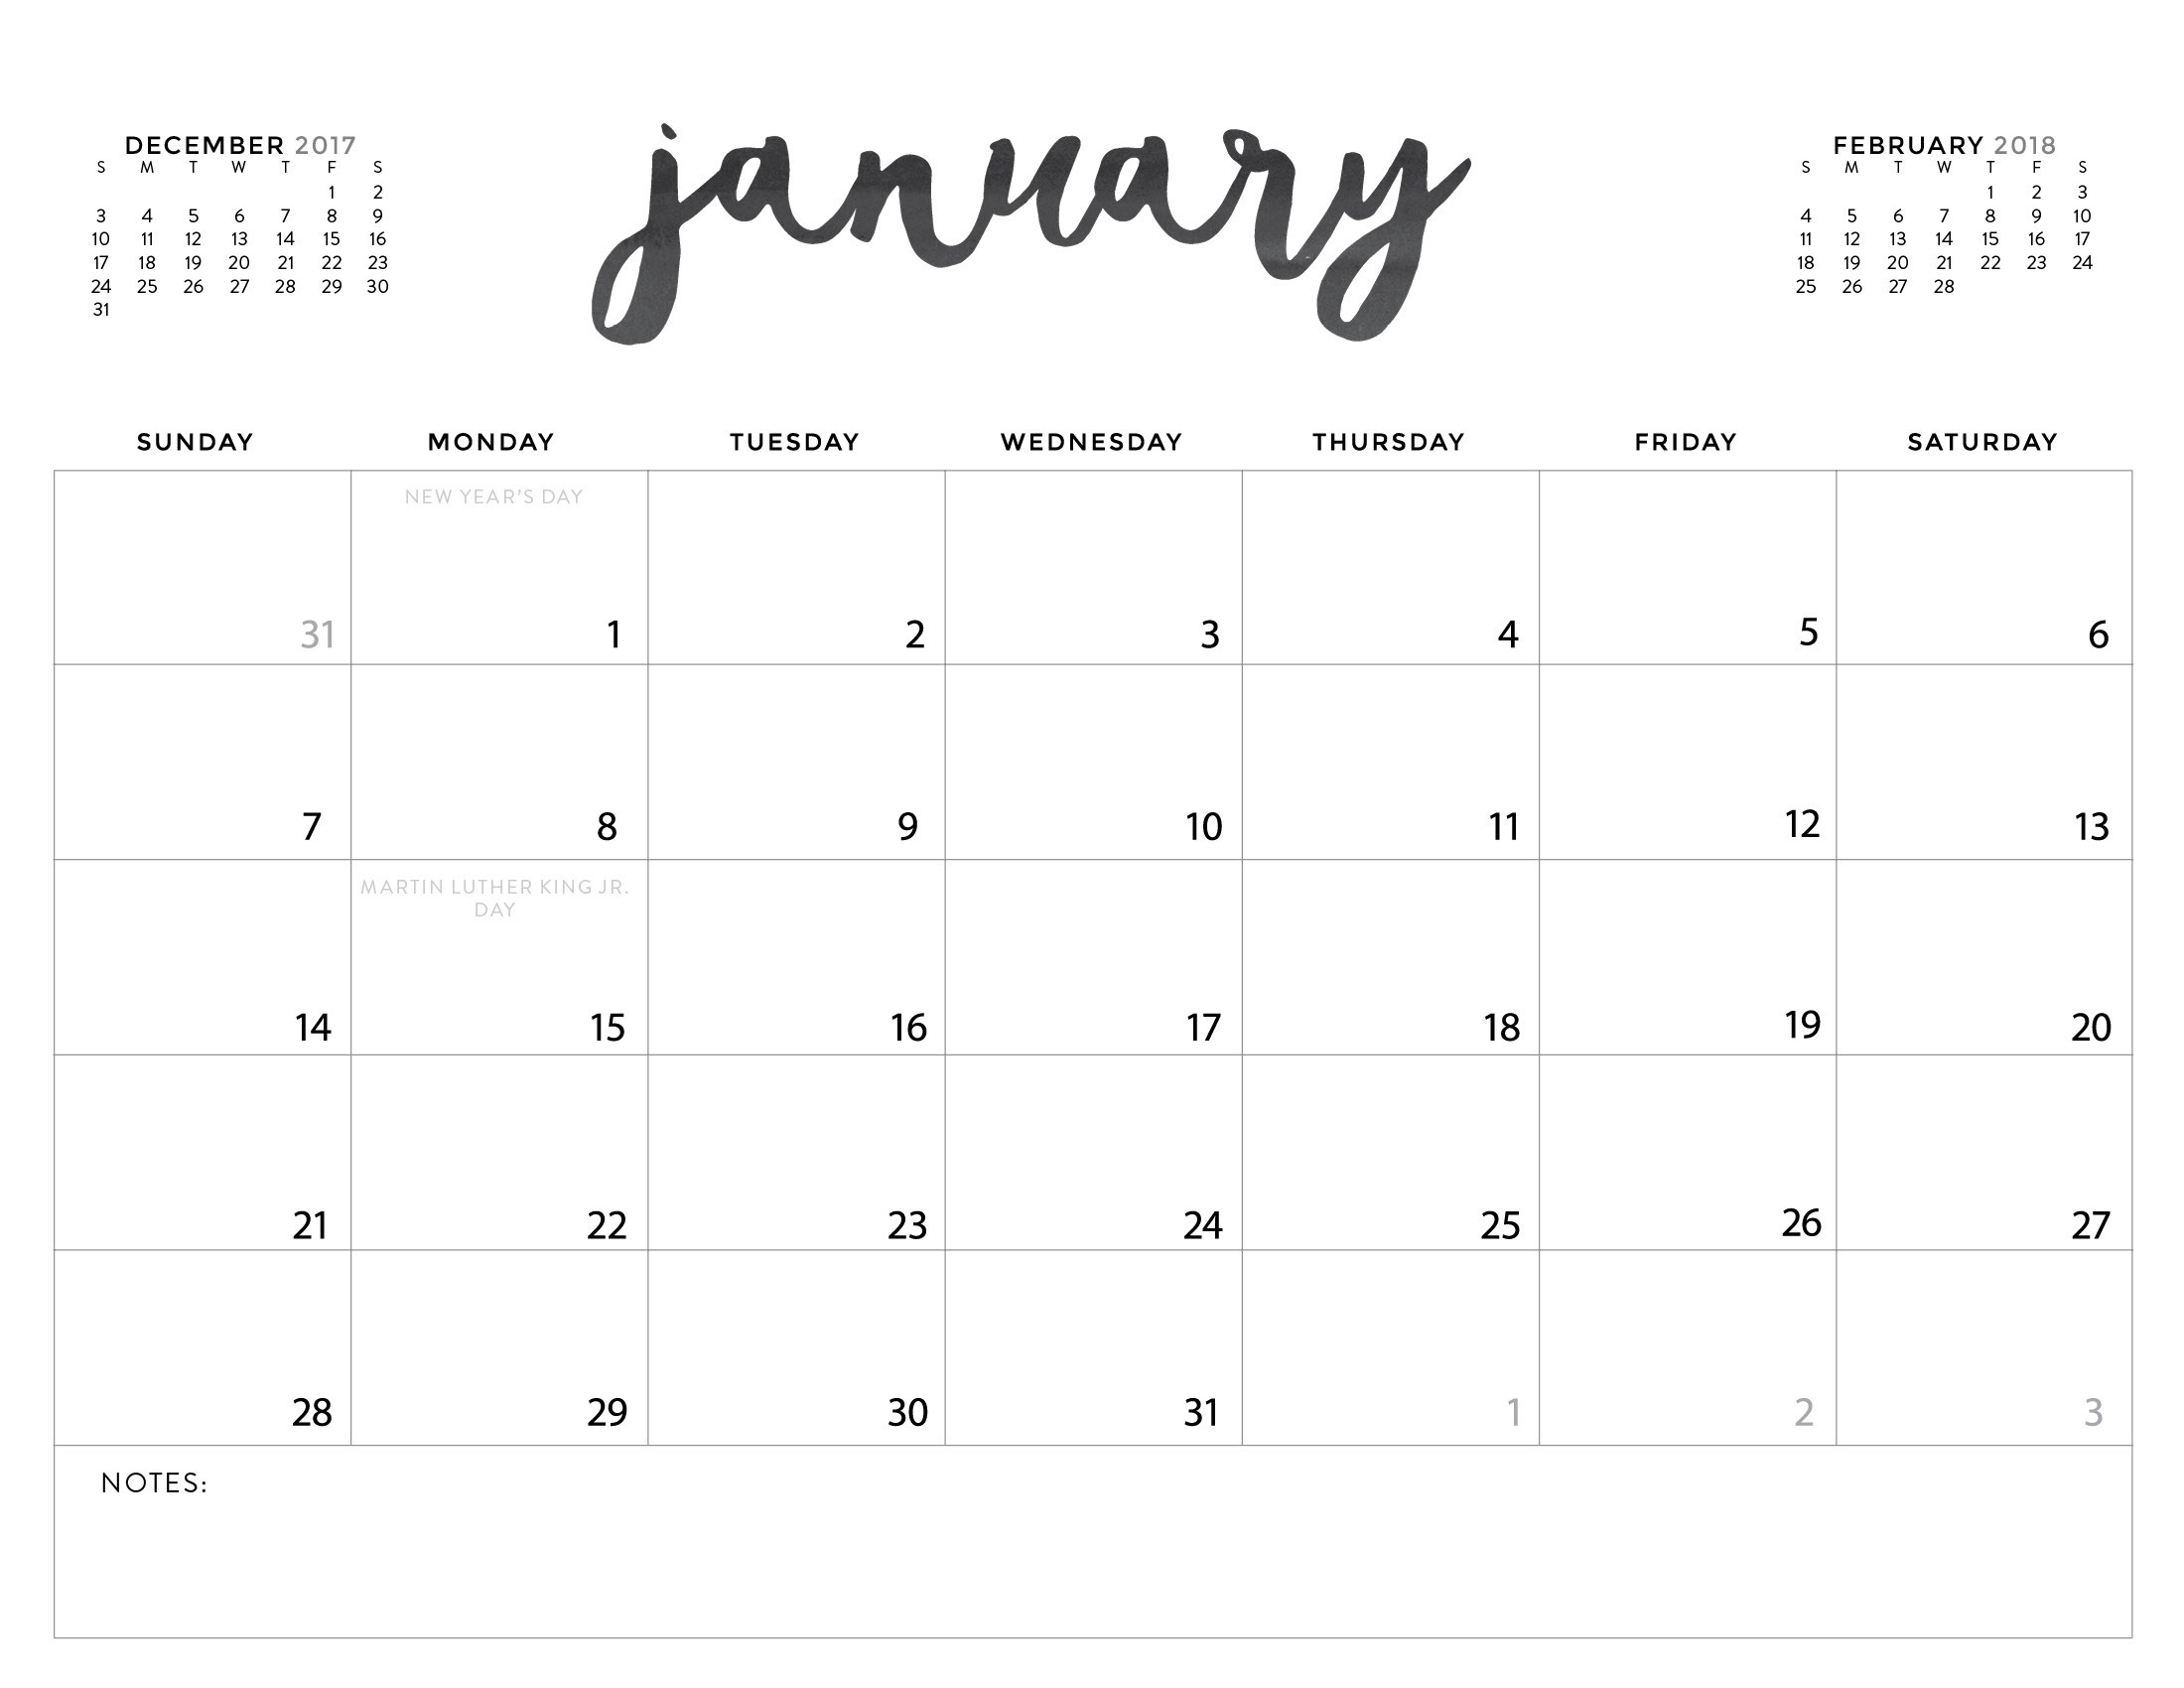 Download Your Free 2018 Printable Calendars Today There Are 28